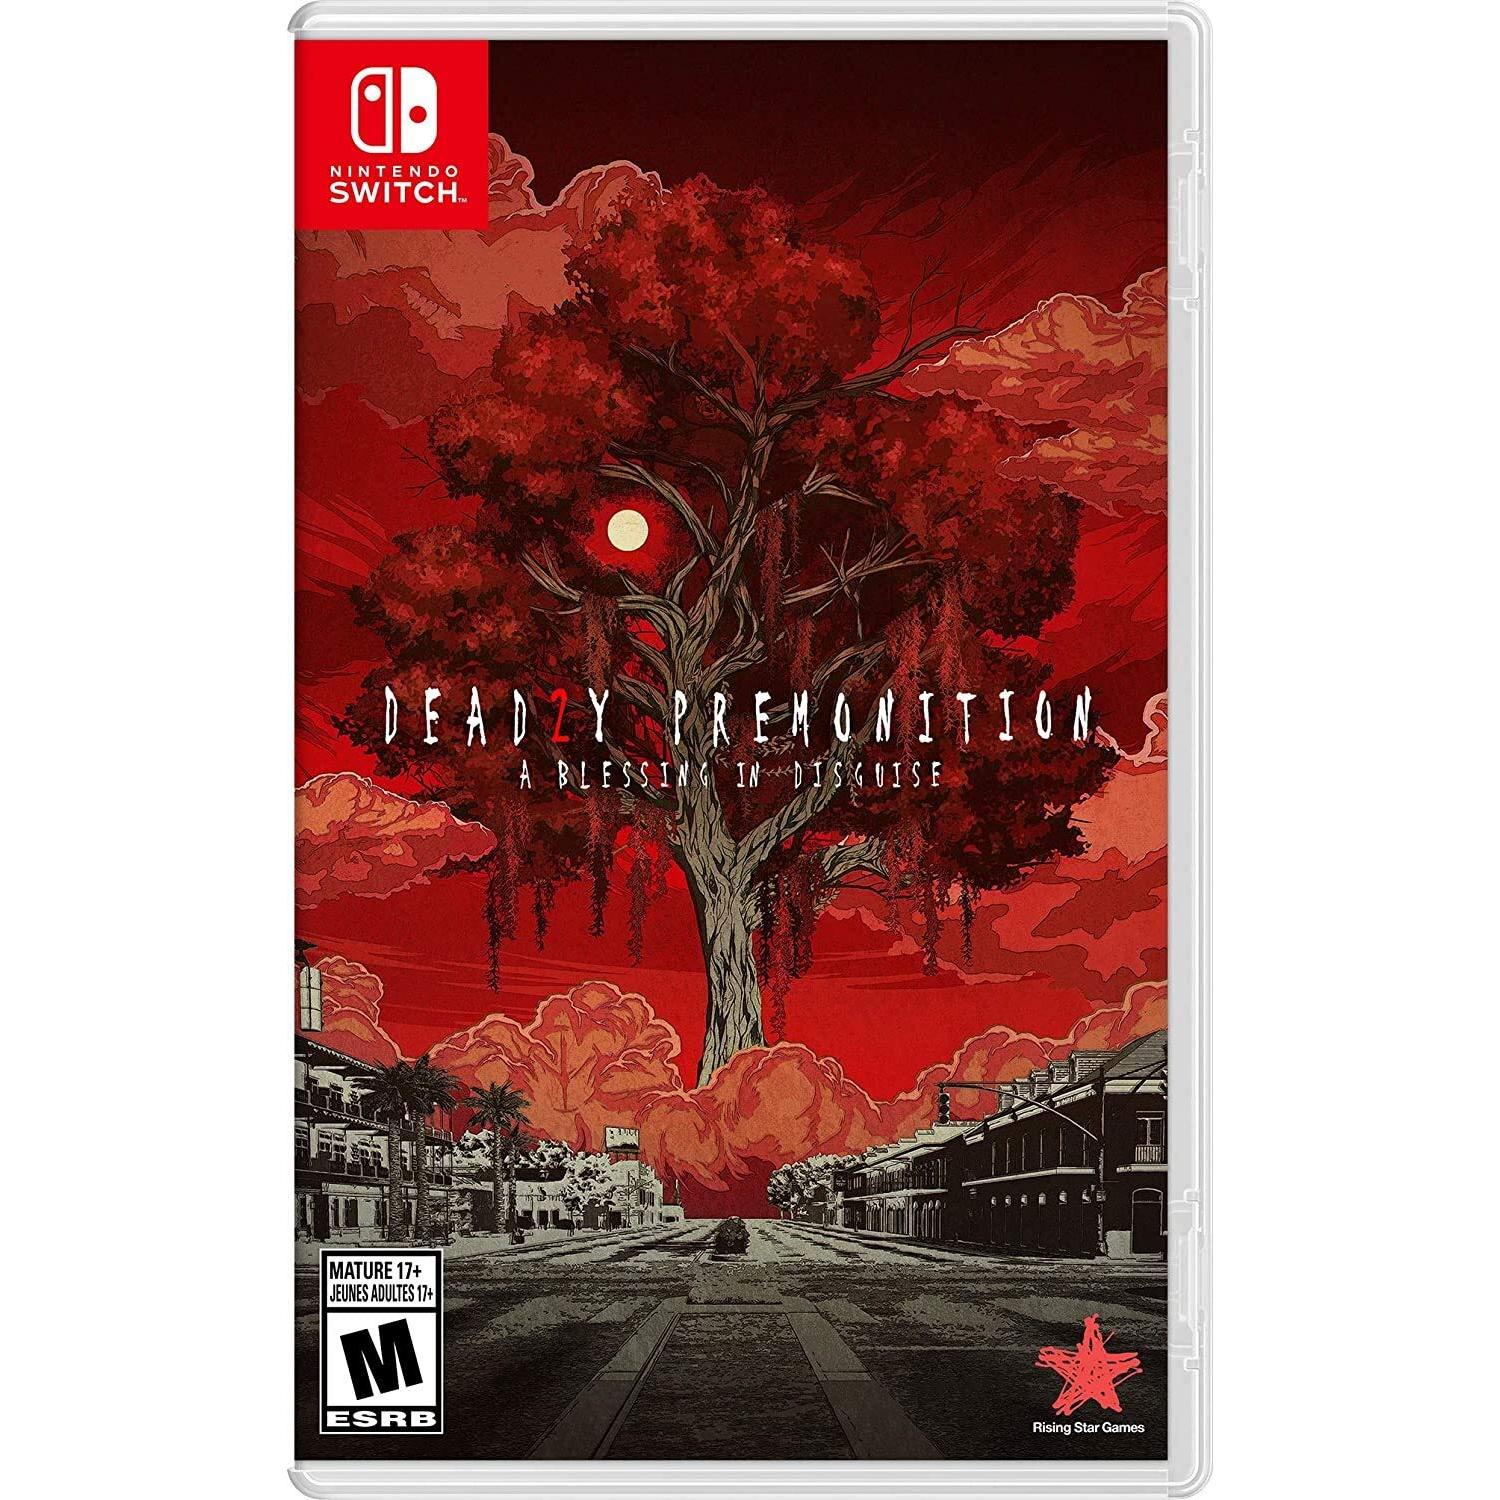 Nintendo - Deadly Premonition 2: A Blessing in Disguise